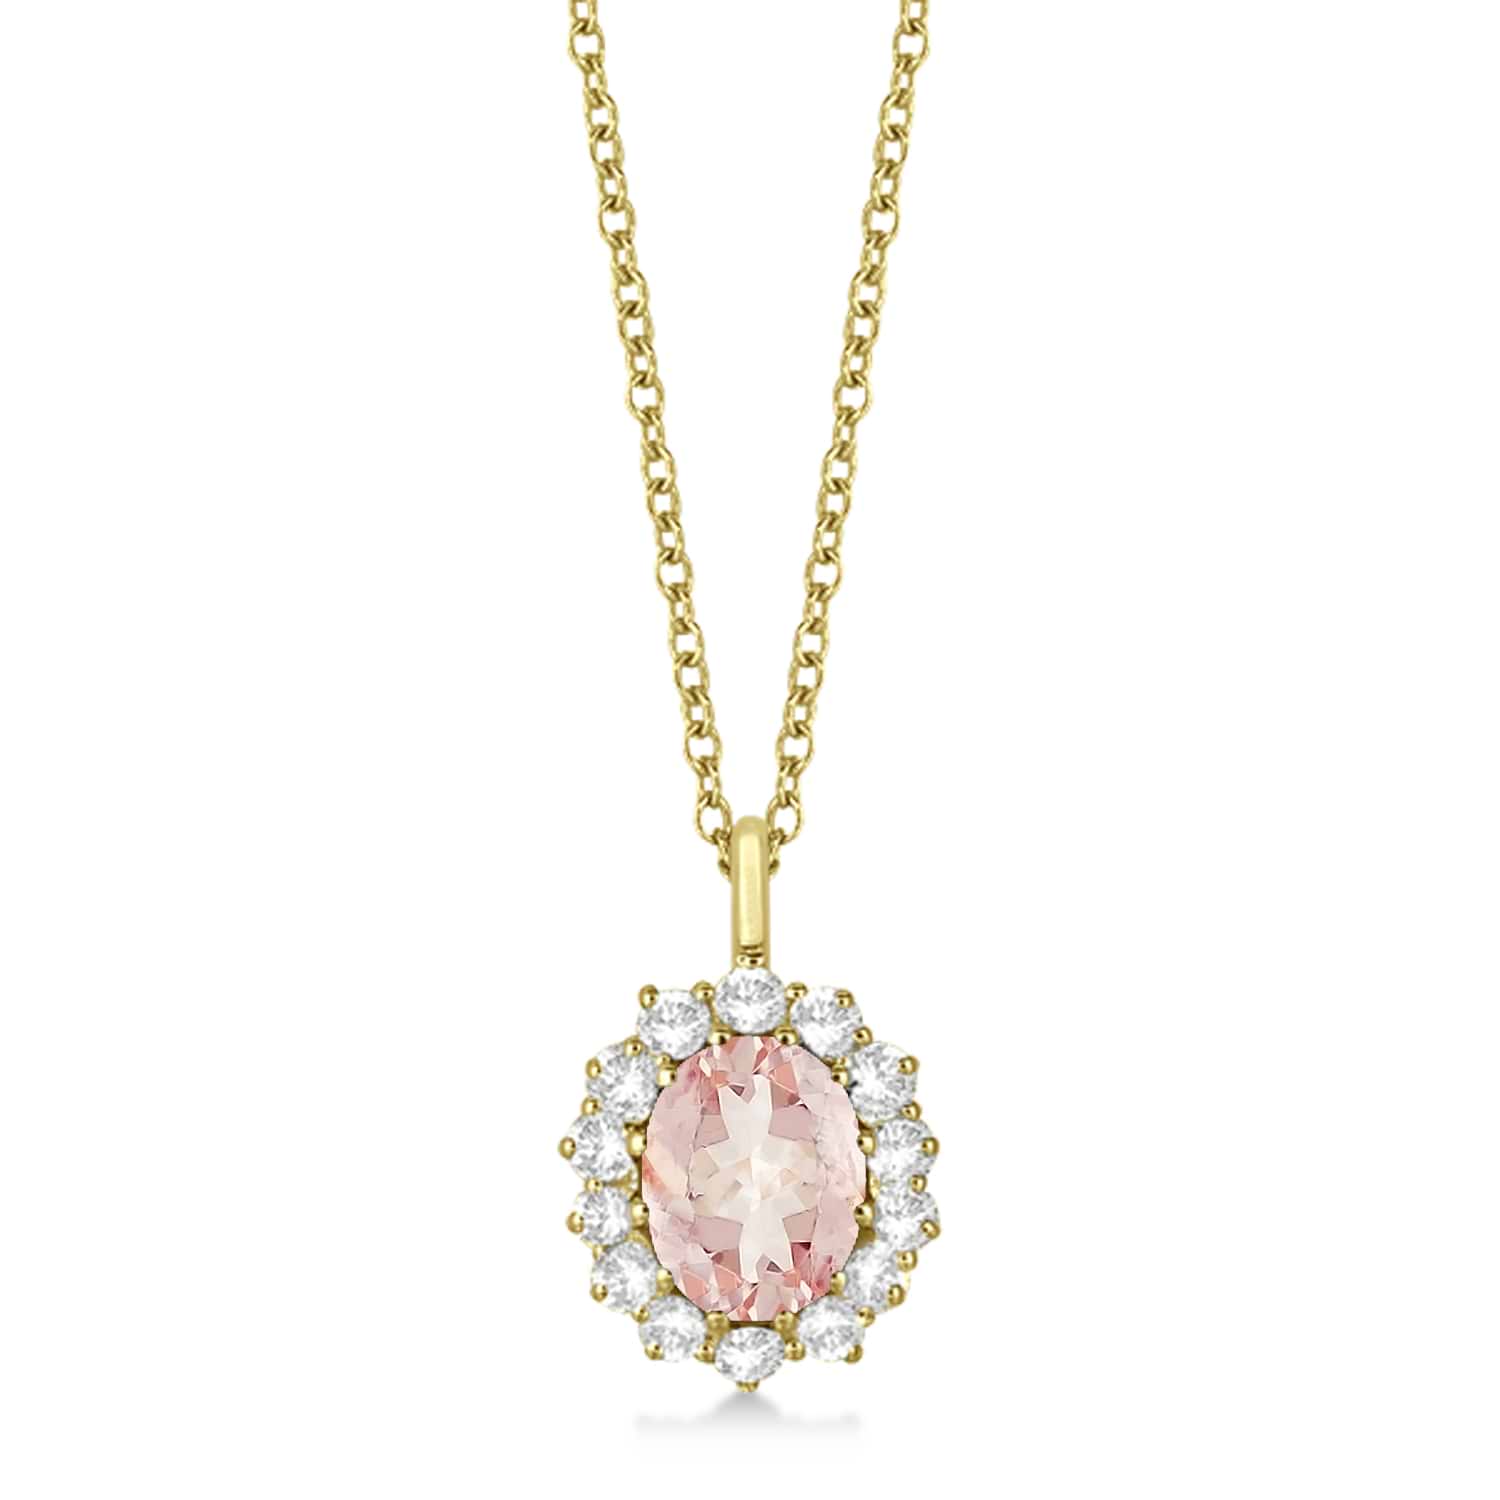 Oval Morganite and Diamond Pendant Necklace 14k Yellow Gold (3.60ctw)